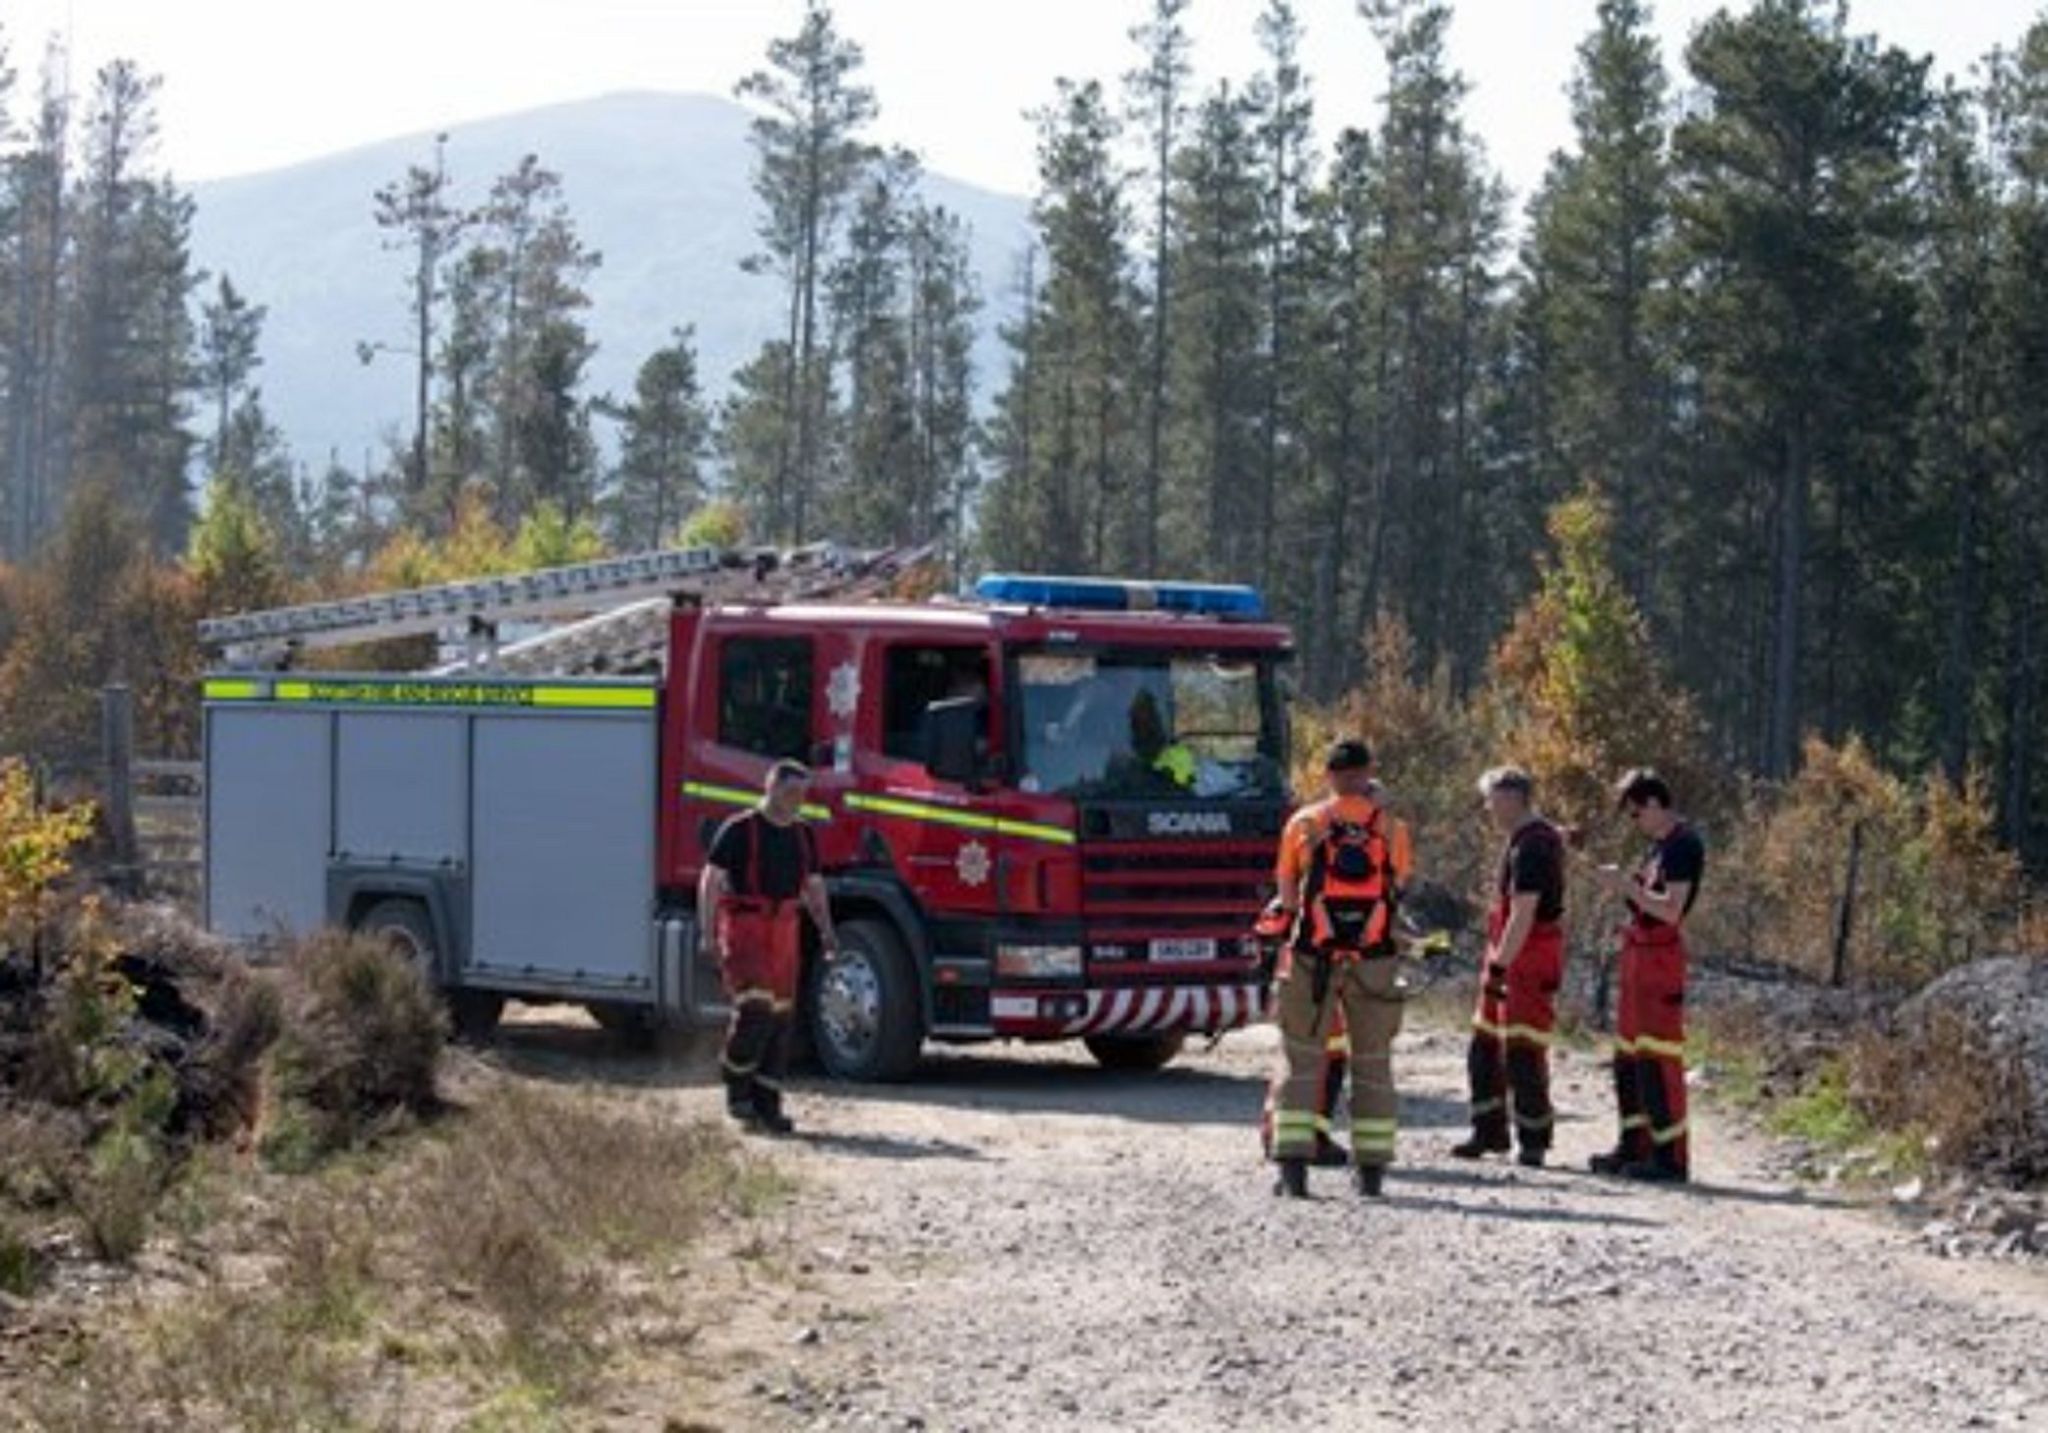 Firefighters at the scene of a wildfire in the Highlands